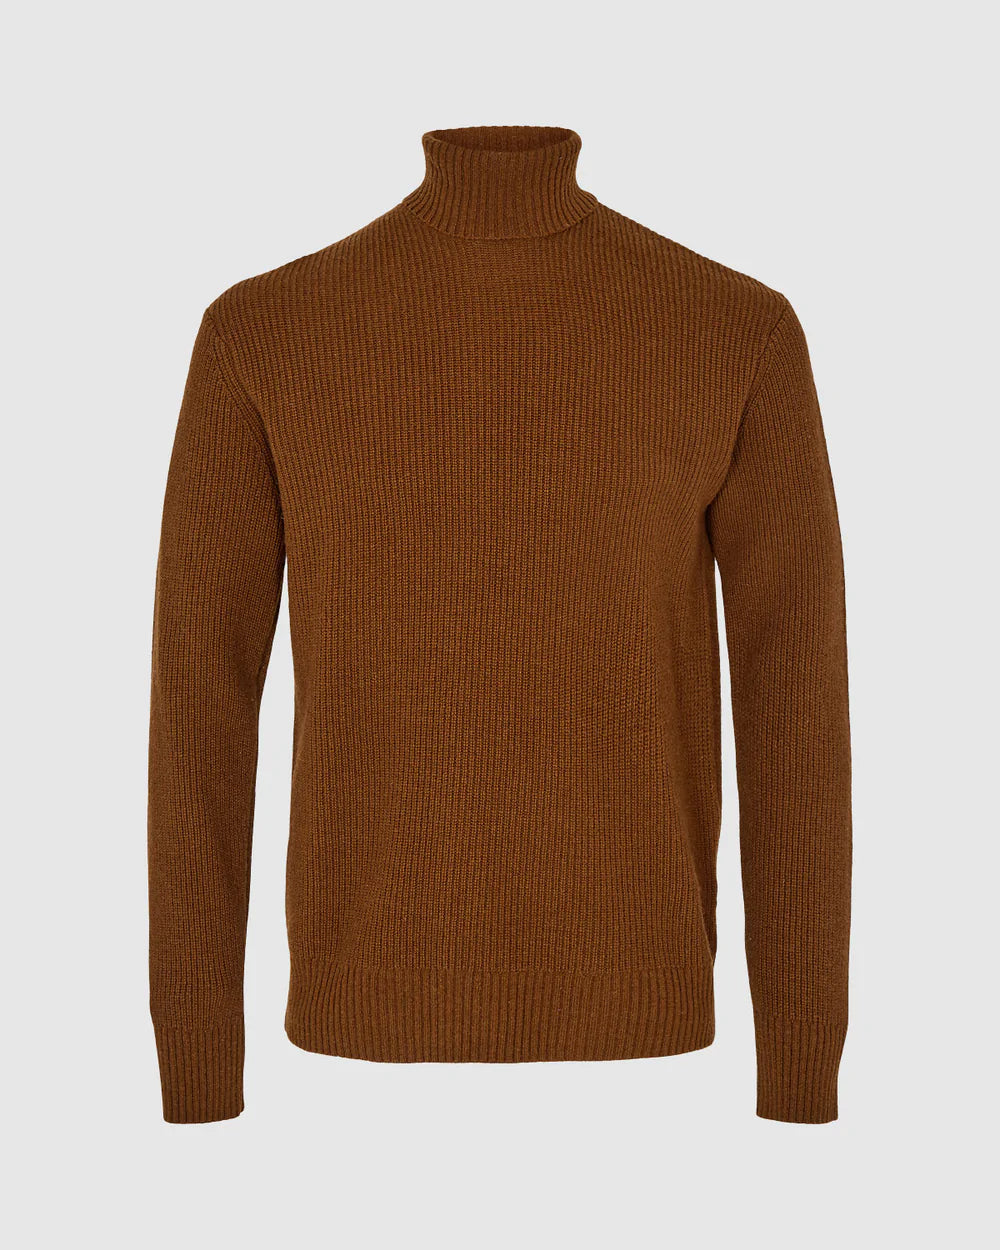 hargreaves sweater